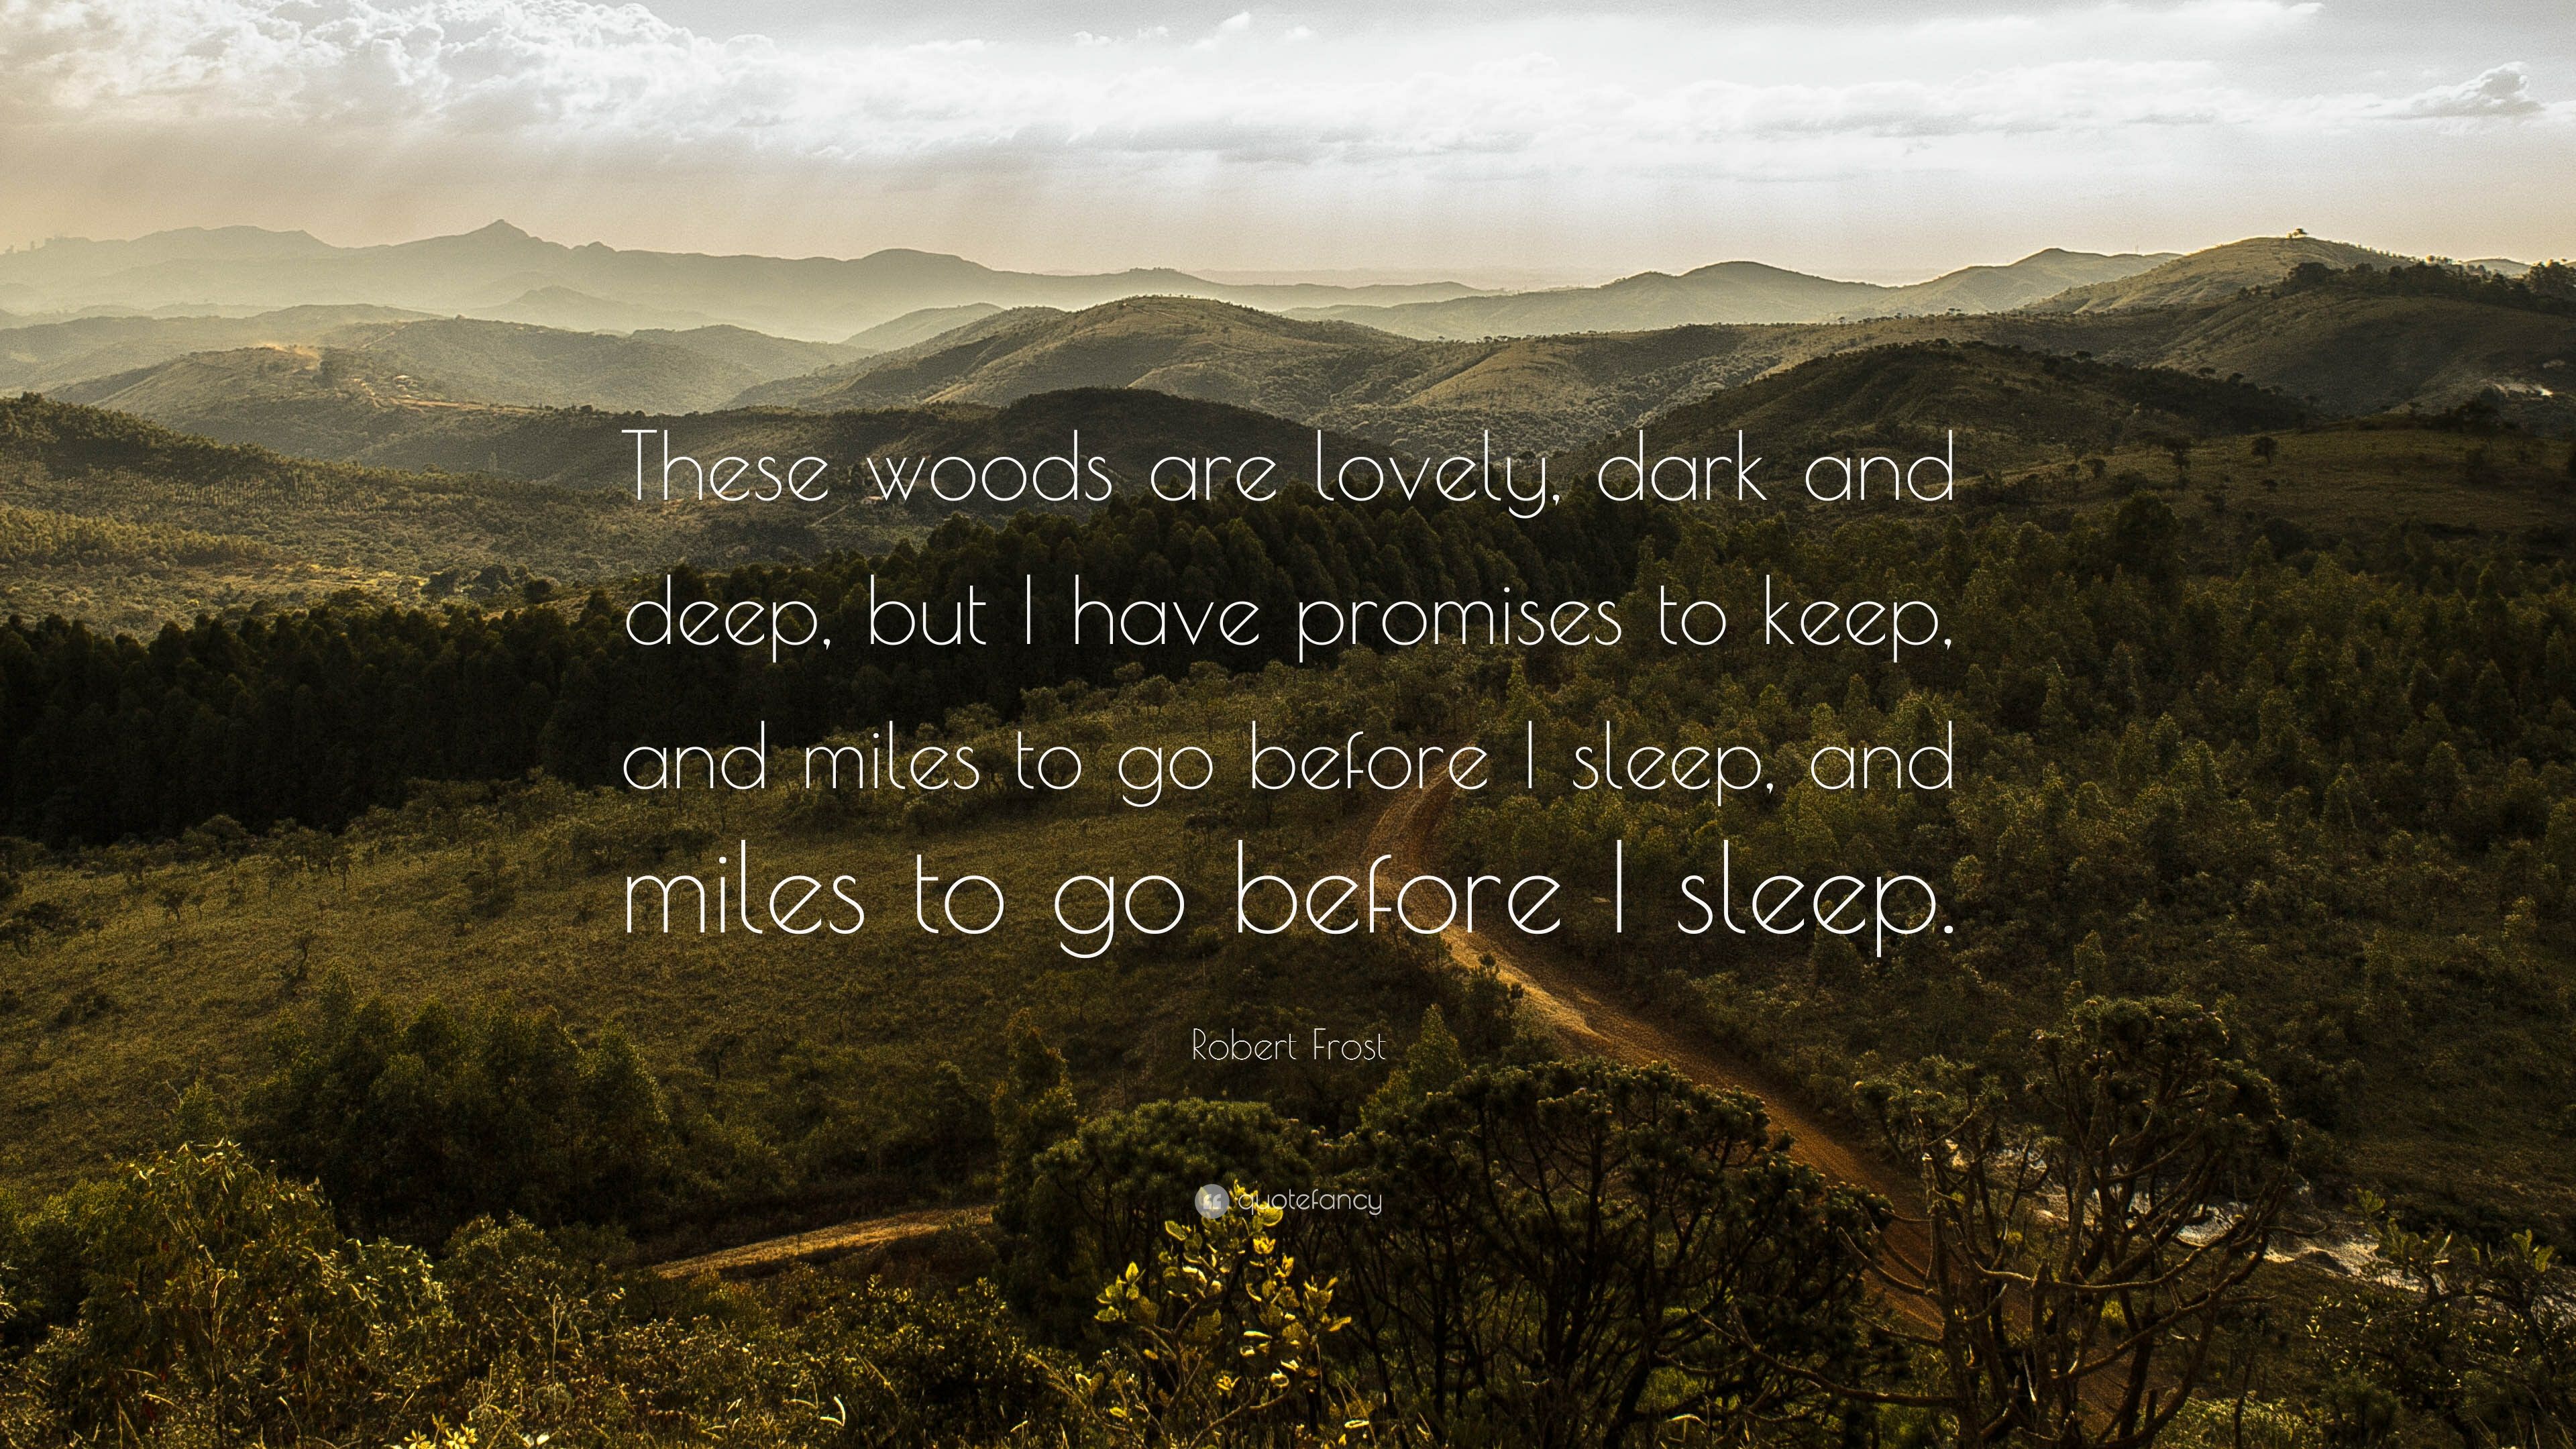 Robert Frost Quote: “The woods are lovely, dark and deep, but I